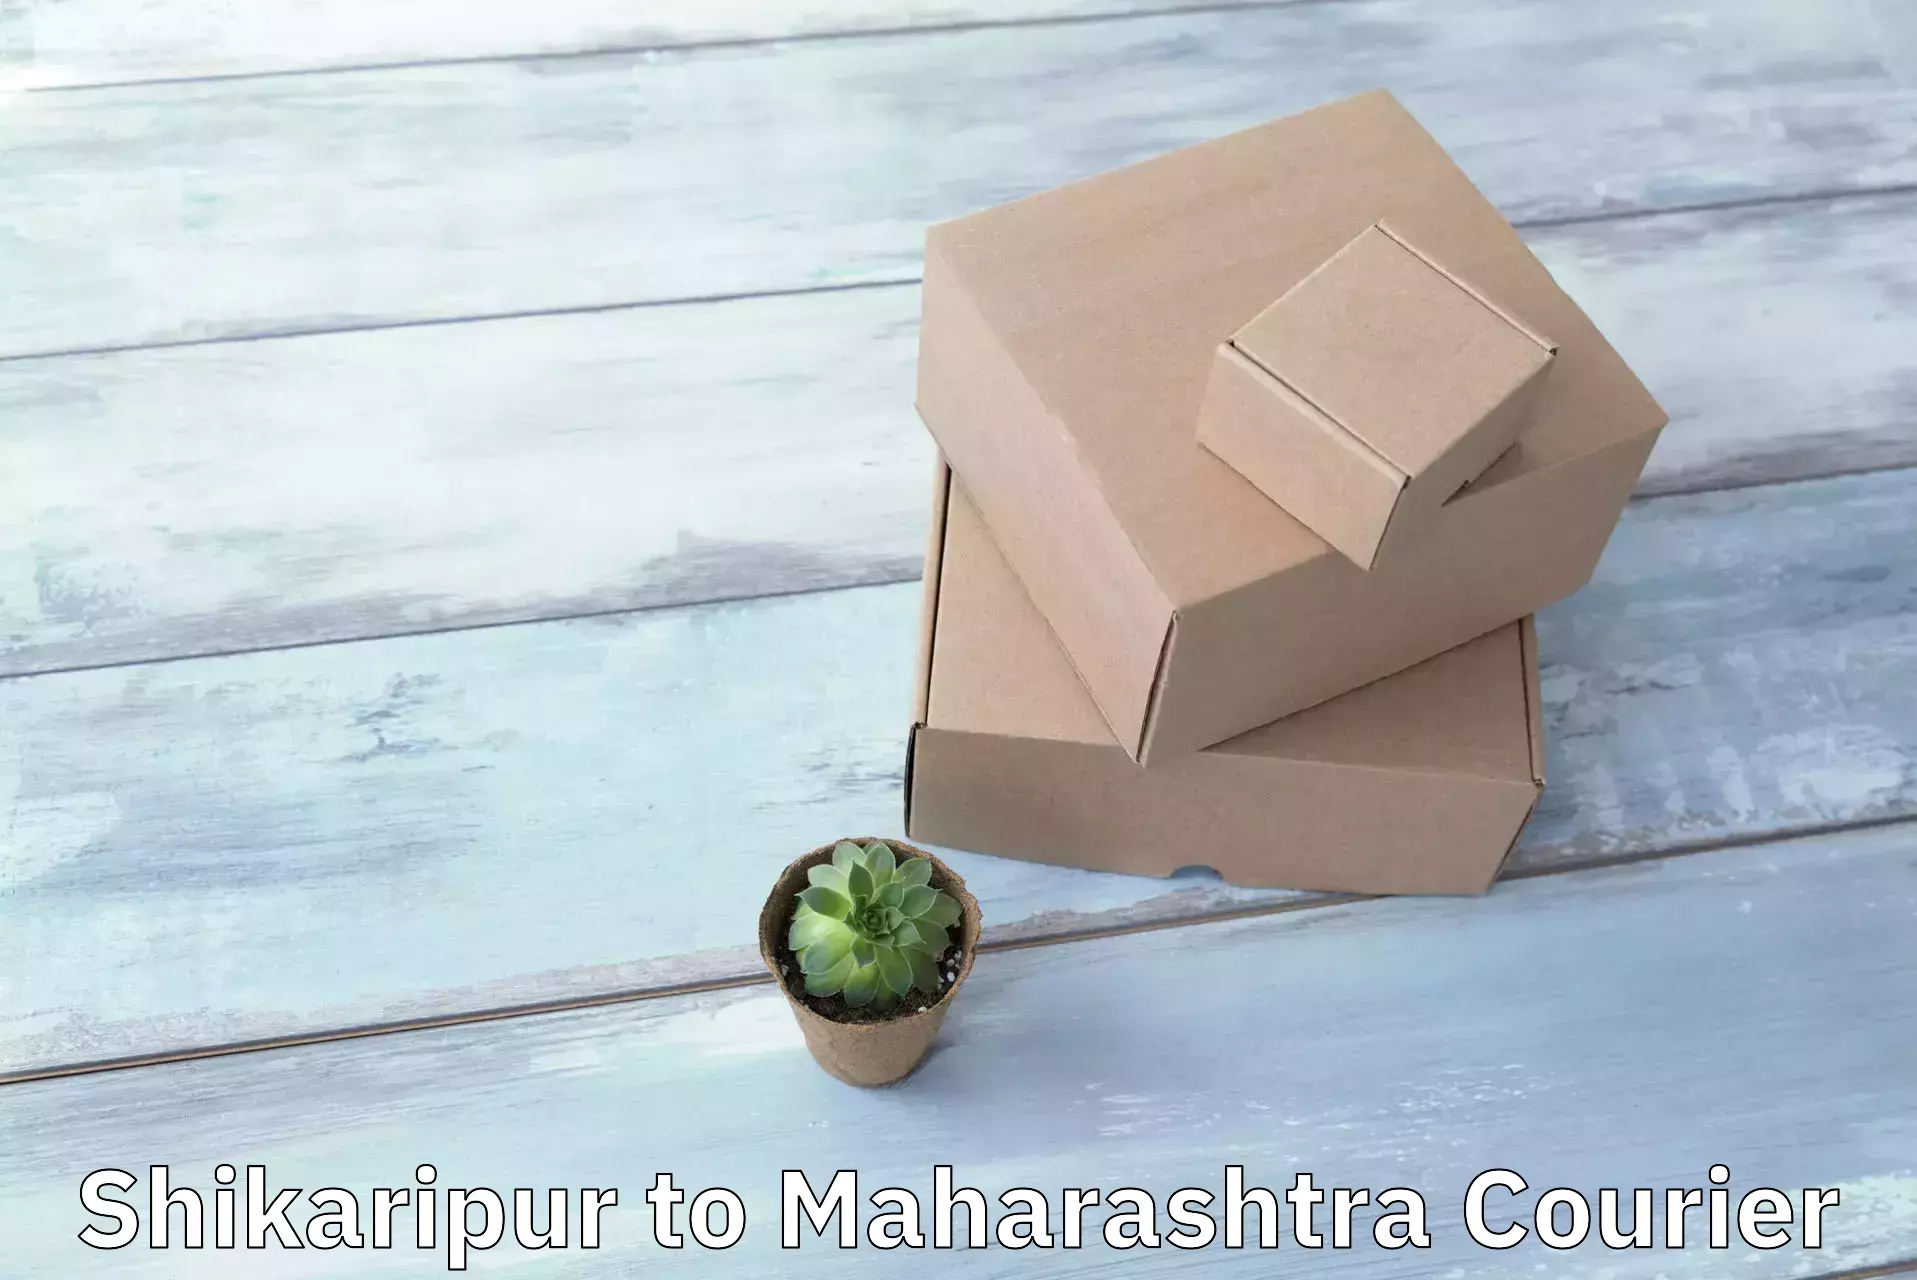 Courier dispatch services Shikaripur to Chandrapur